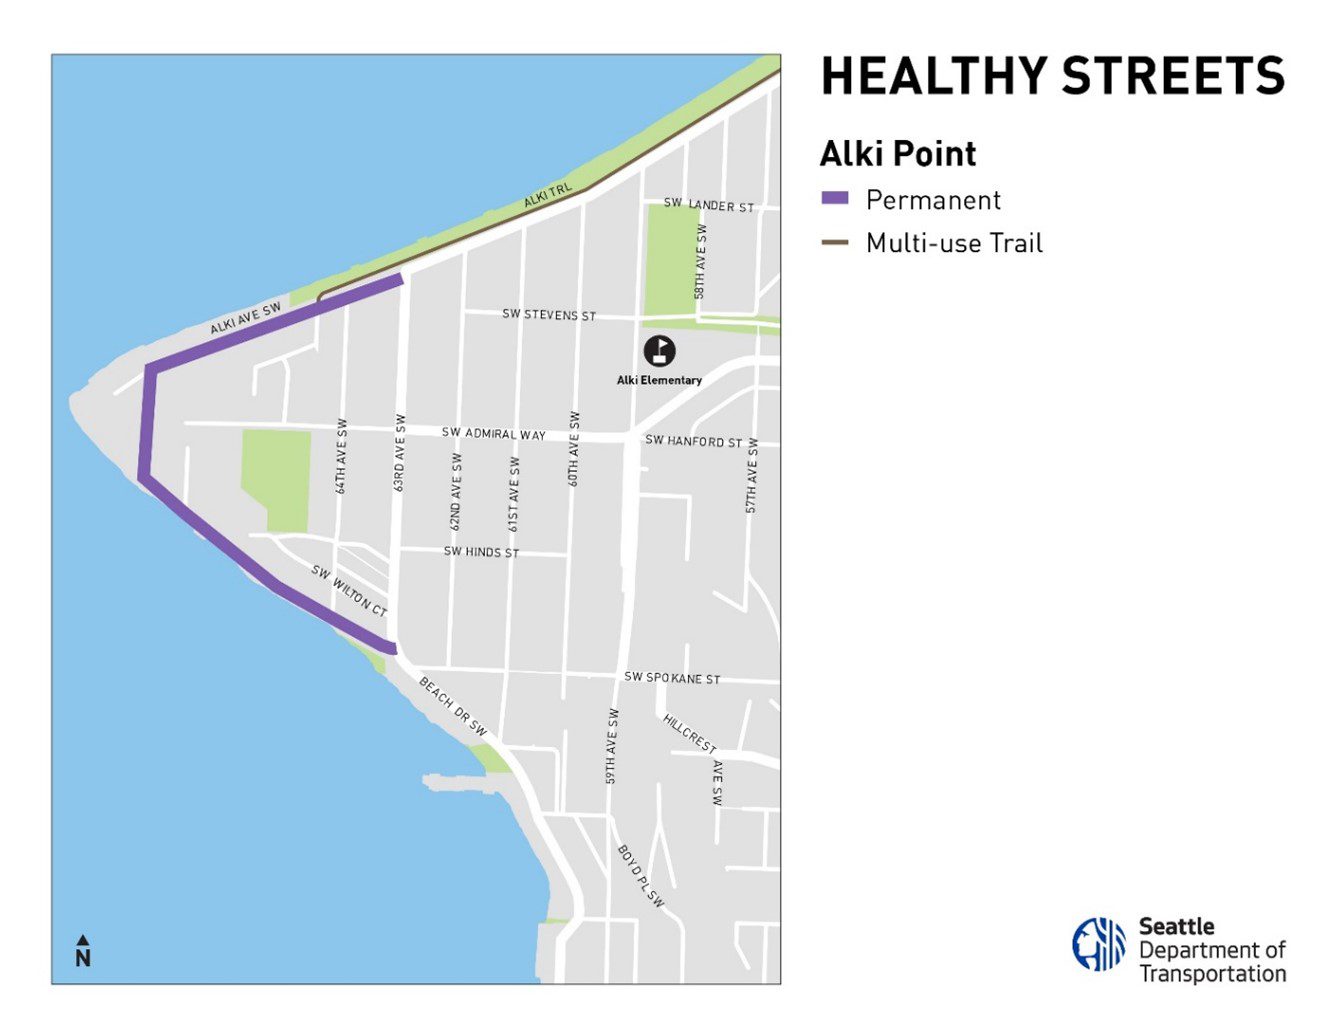 Map of the Alki Point Healthy Street. The location is shown with a purple line, along Alki Ave SW and Beach Dr SW.